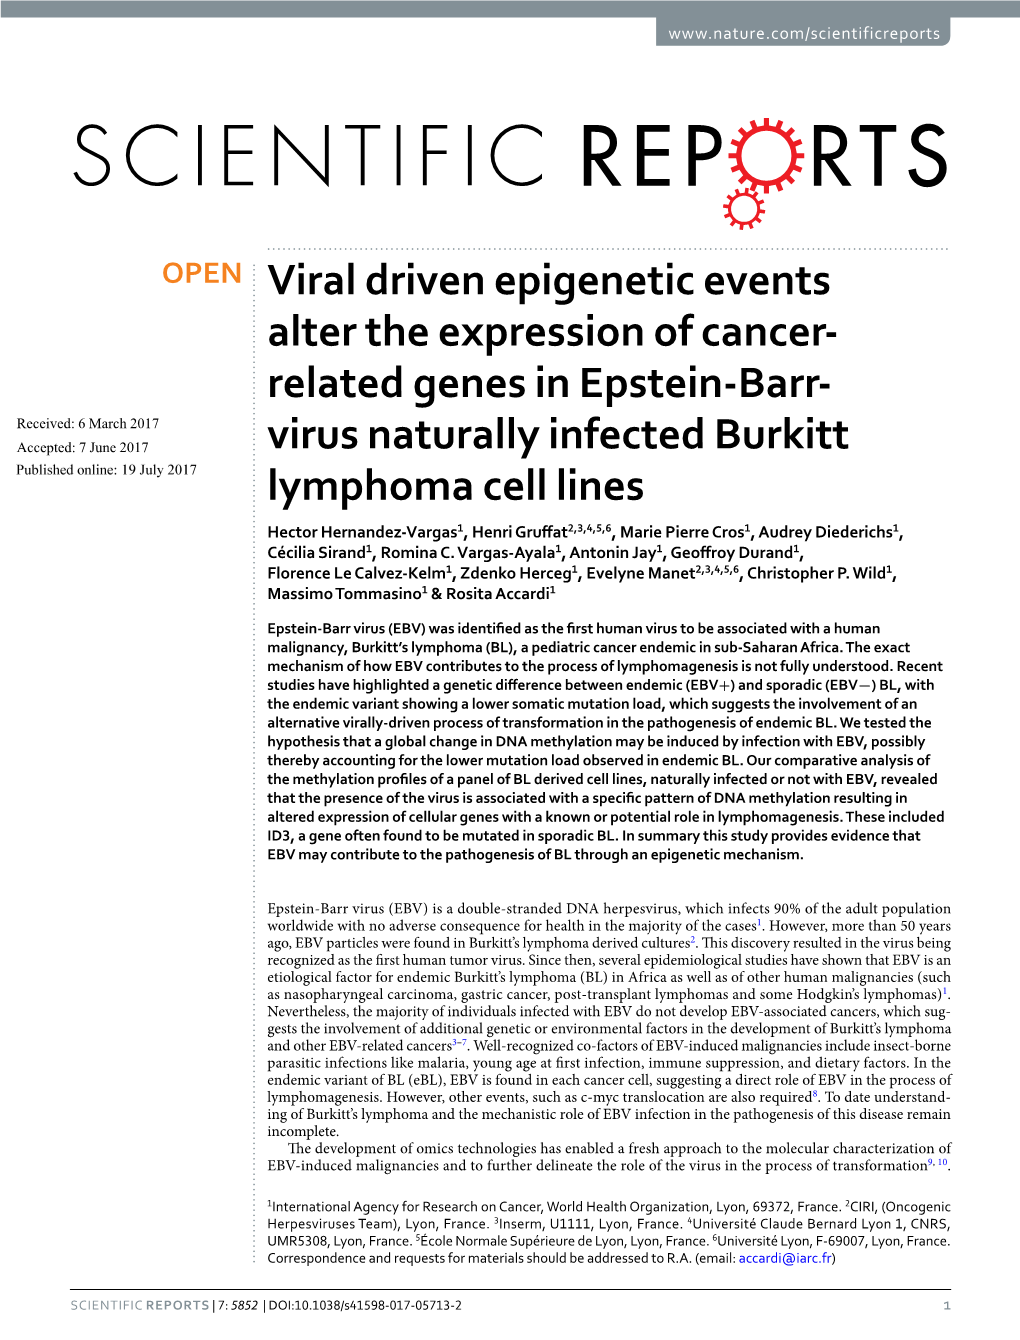 Viral Driven Epigenetic Events Alter the Expression of Cancer-Related